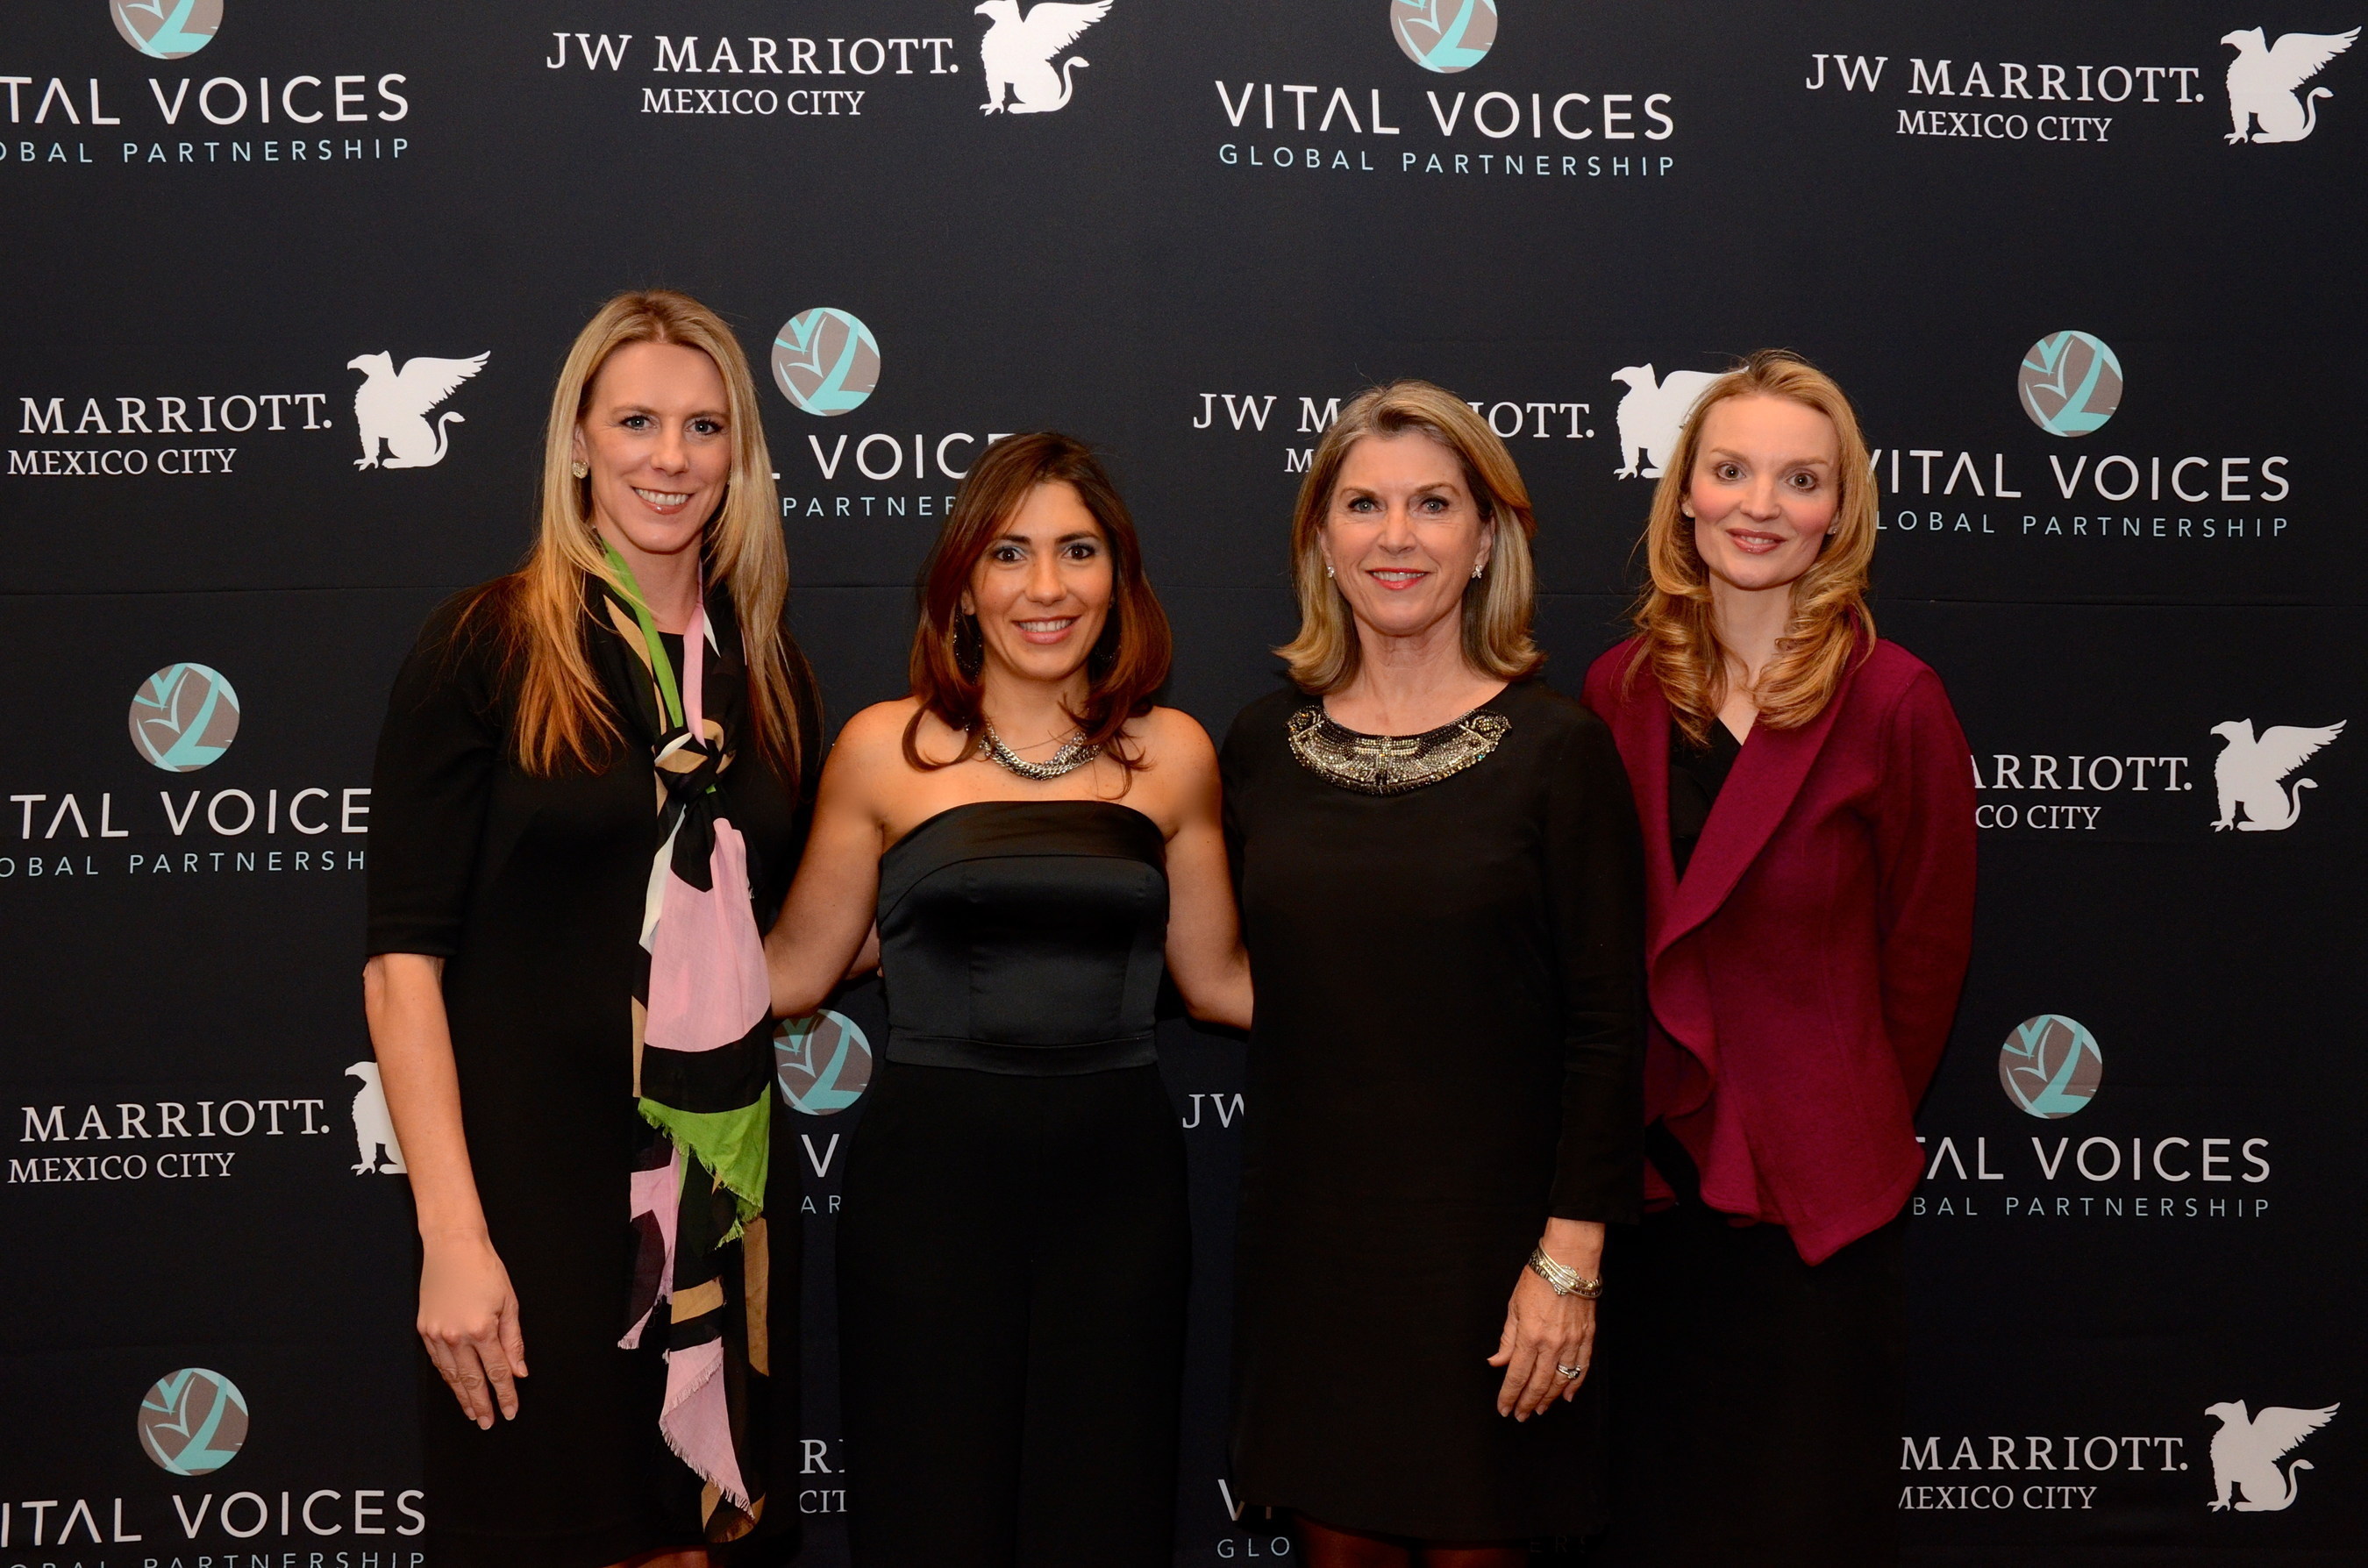 L-R: Mitzi Gaskins, VP & Global Brand Manager, JW Marriott Hotels & Resorts; Belen Alonso, Director of Sales, JW Marriott Hotel Mexico City & VV GROW Mentor; Kathleen Matthews, Chief Global Communications and Public Affairs Officer, Marriott International; Alyse Nelson, Vital Voices President & CEO.